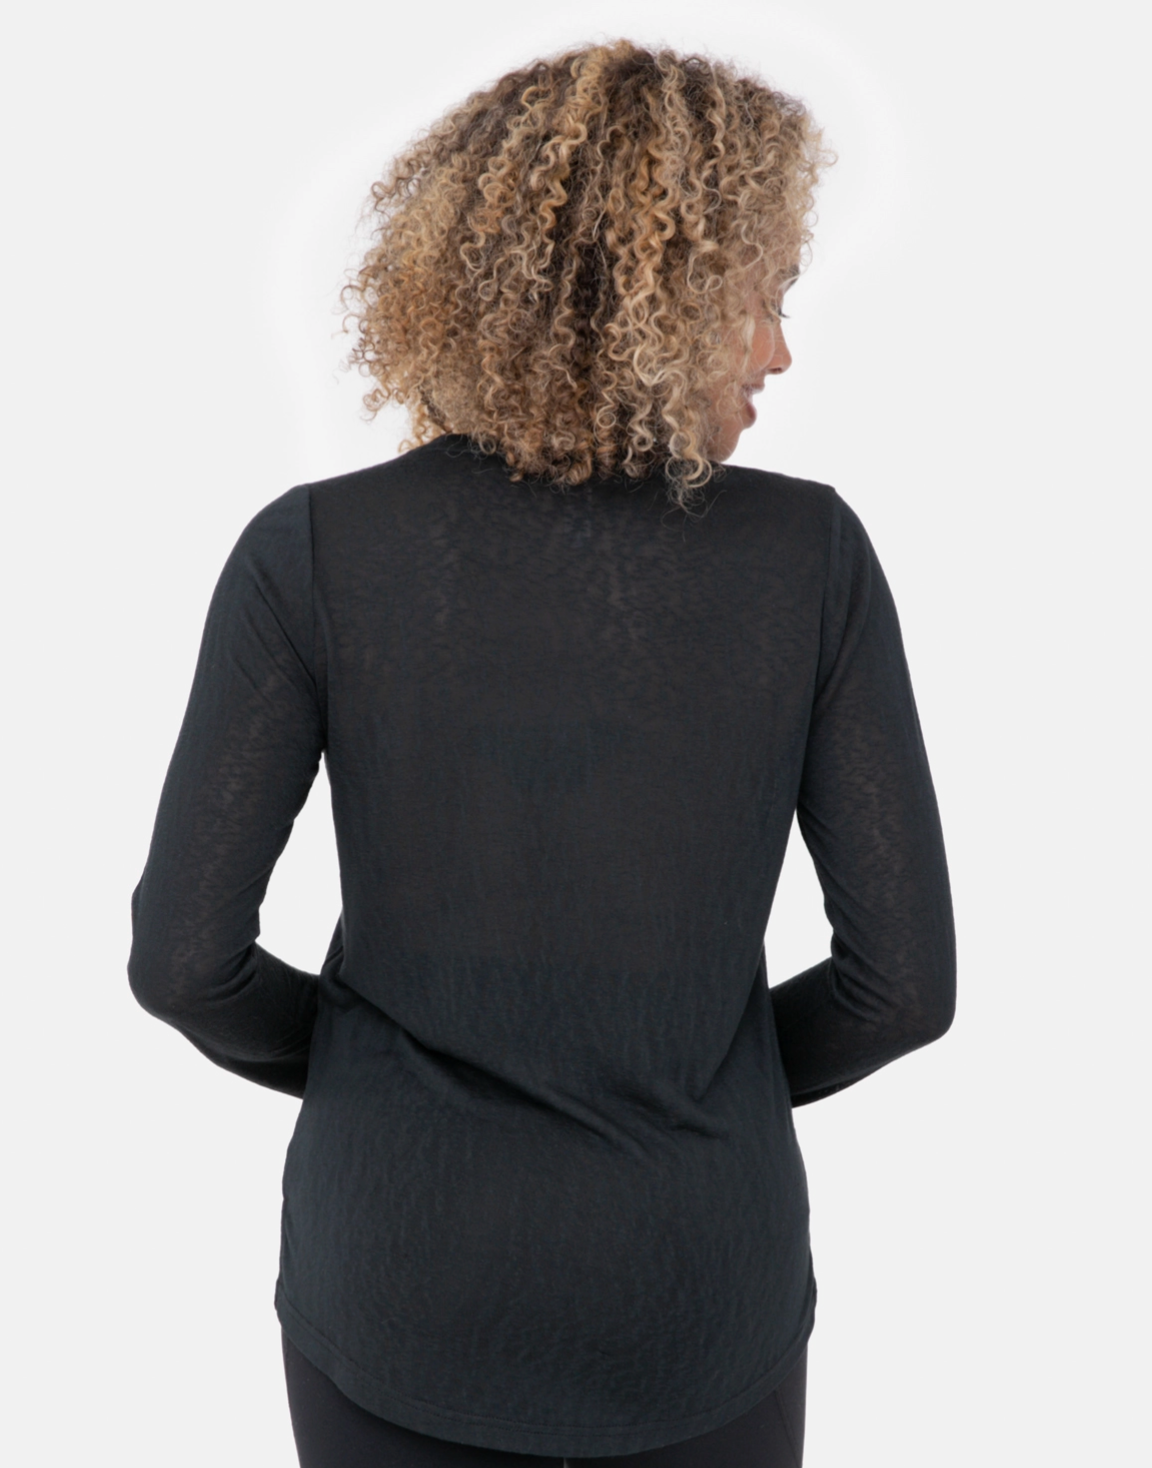 Modal-Blend Crew Neck Long Sleeve Tee in Black - The Street Boutique 